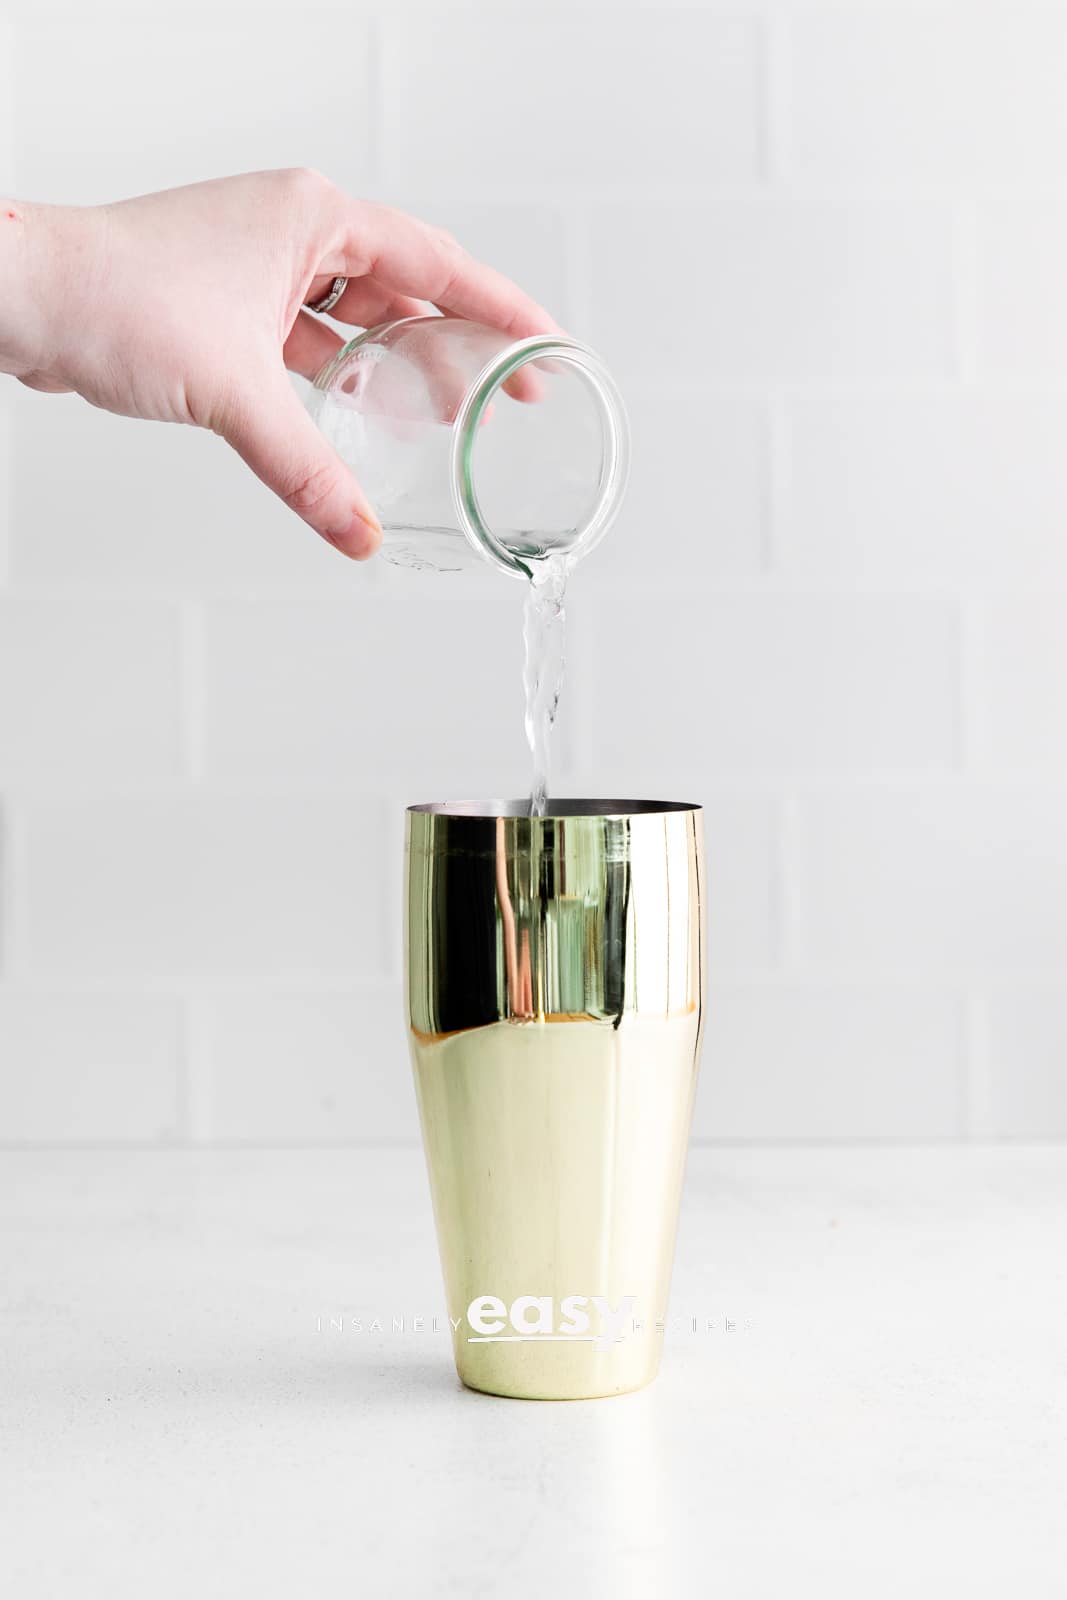 clear liquid being poured into golden cocktail shaker